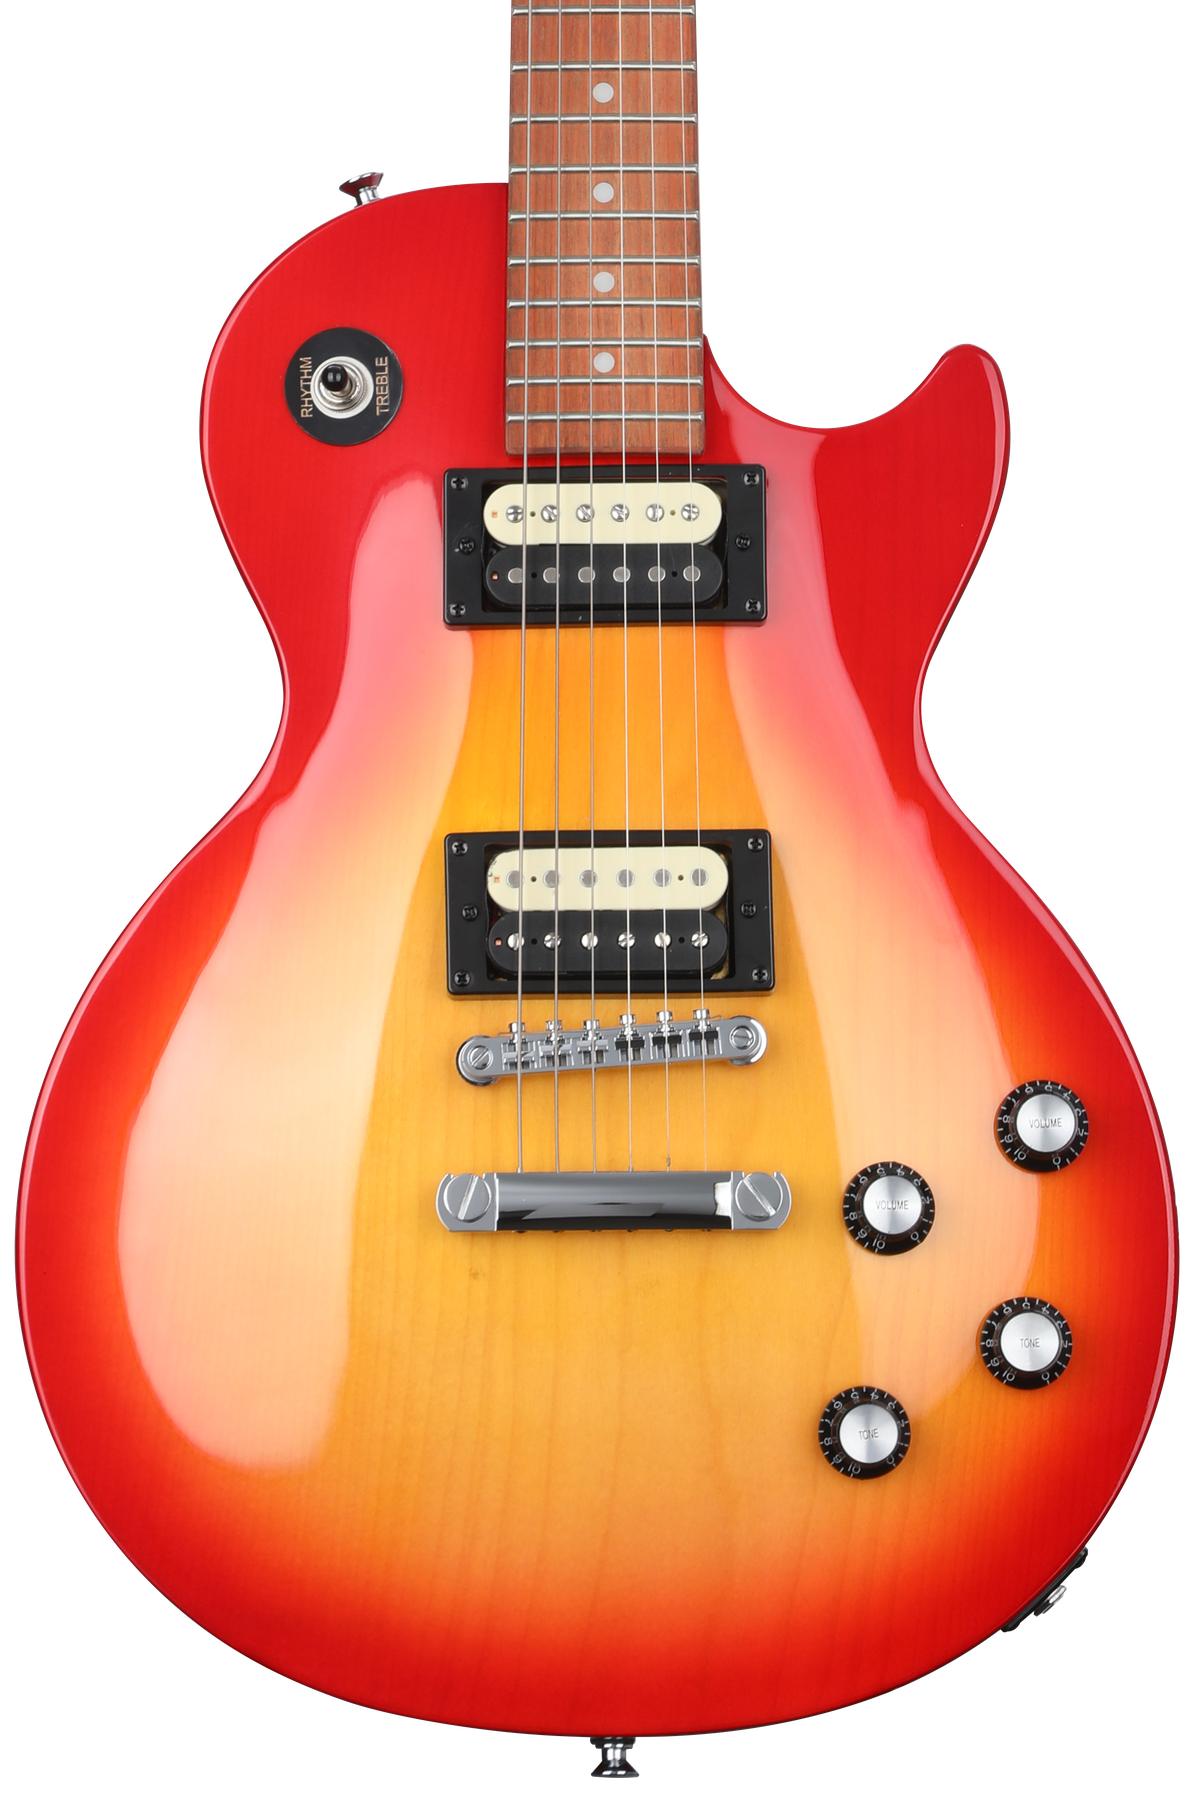 Epiphone Les Paul Studio vs Standard - Differences, and Which is Better?